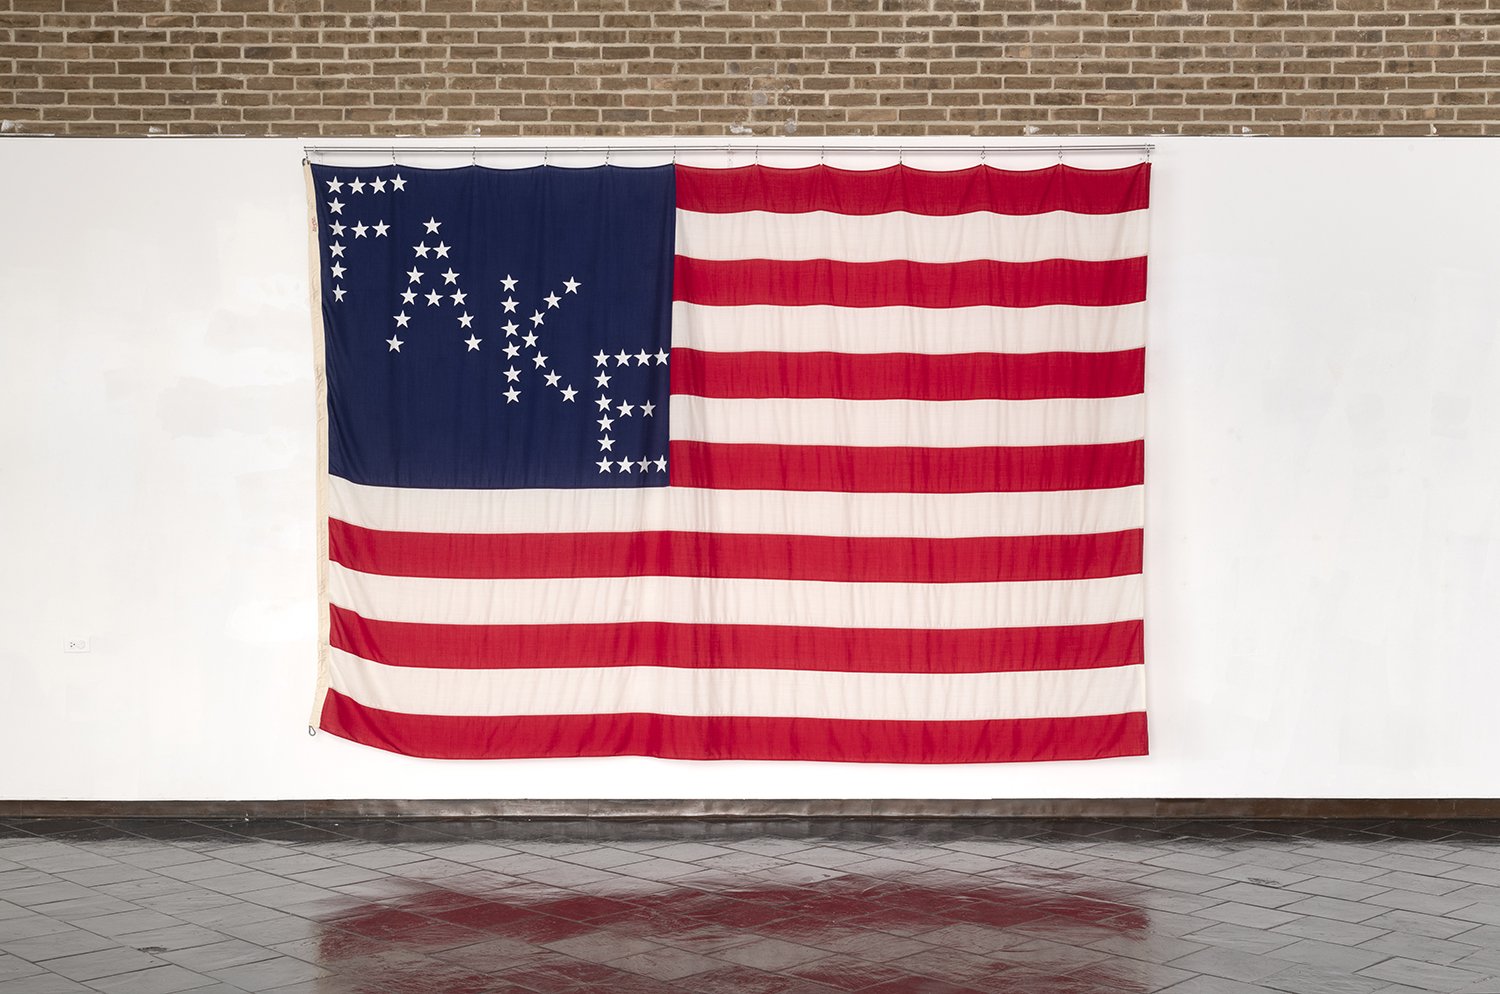   Rec-elections (False Flag),  2017 Wool, cotton 96 x 144 inches Installation view, Westchester Community College, Valhalla, NY 